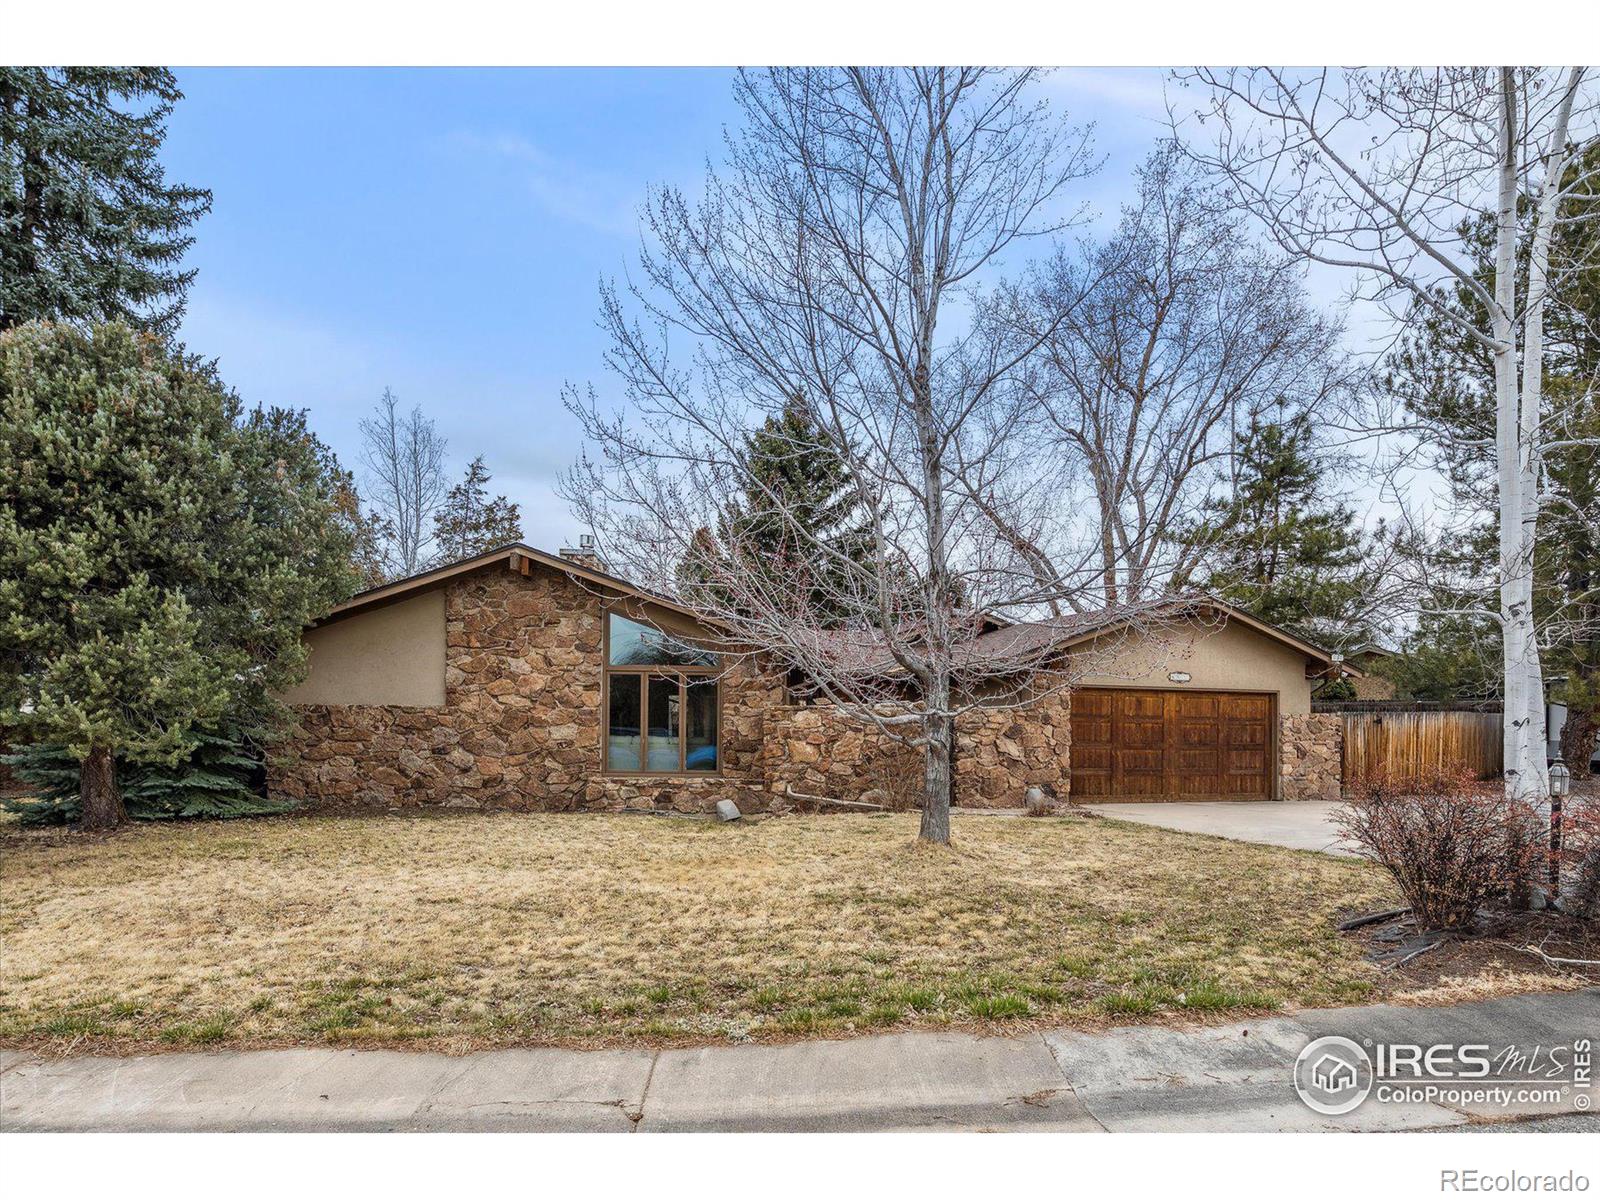 Report Image for 4577  Tanglewood Trail,Boulder, Colorado